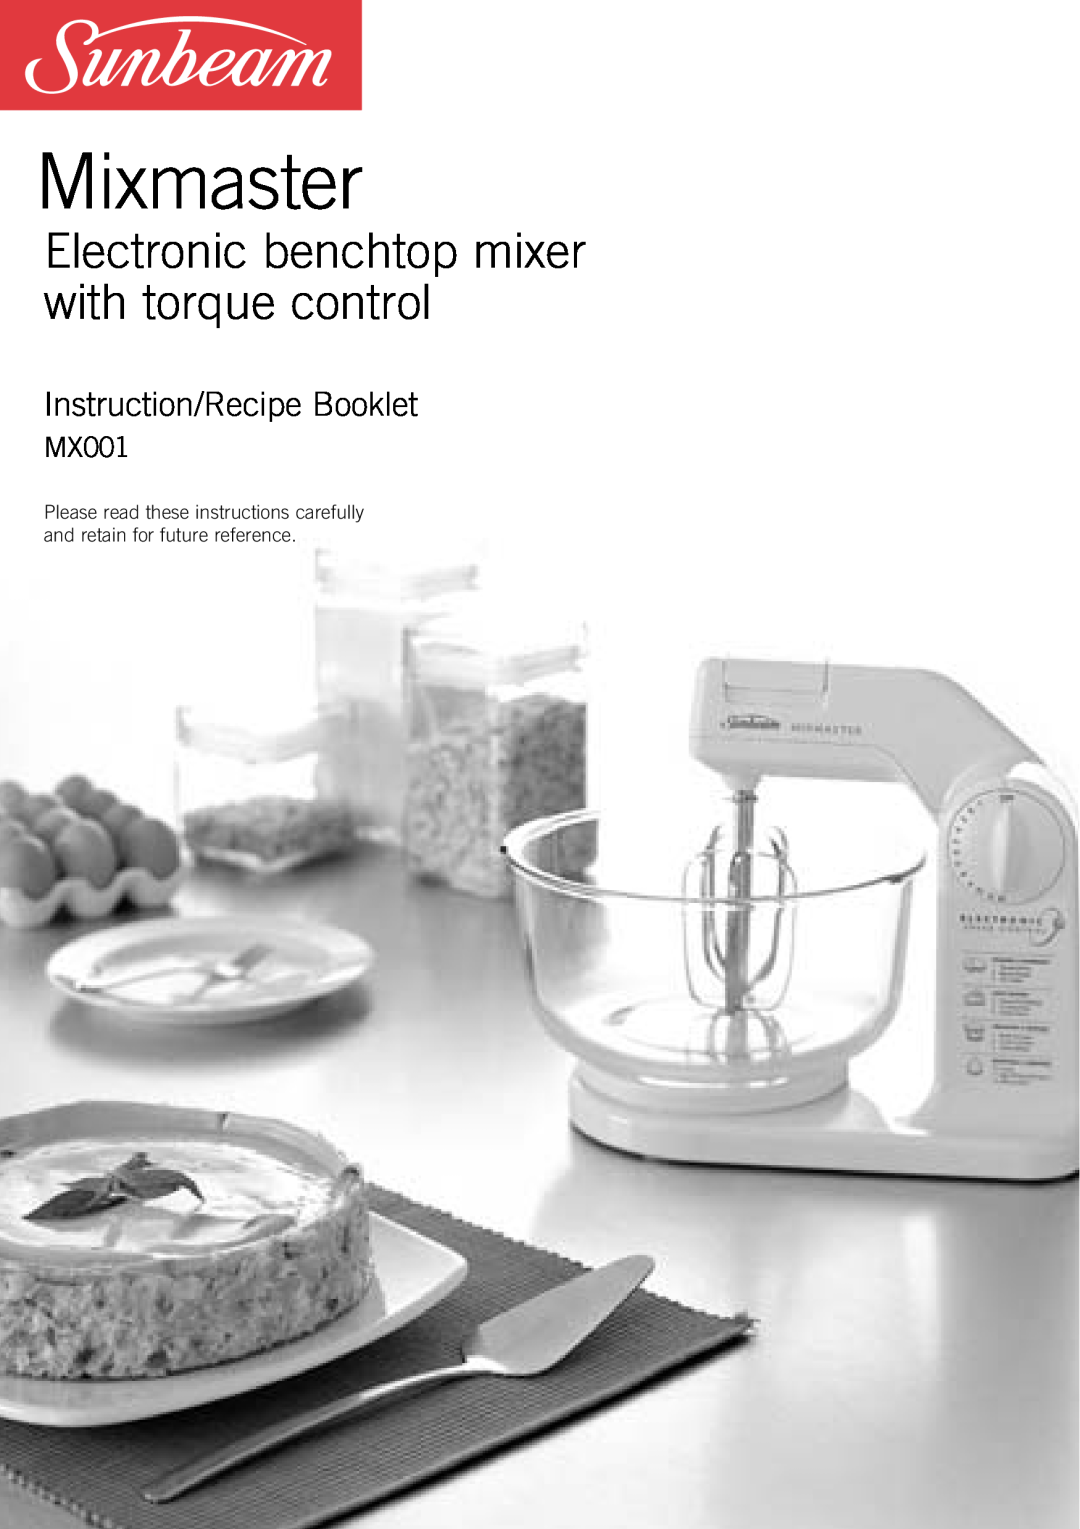 Sunbeam MX001 manual Mixmaster, Electronic benchtop mixer with torque control, Instruction/Recipe Booklet 